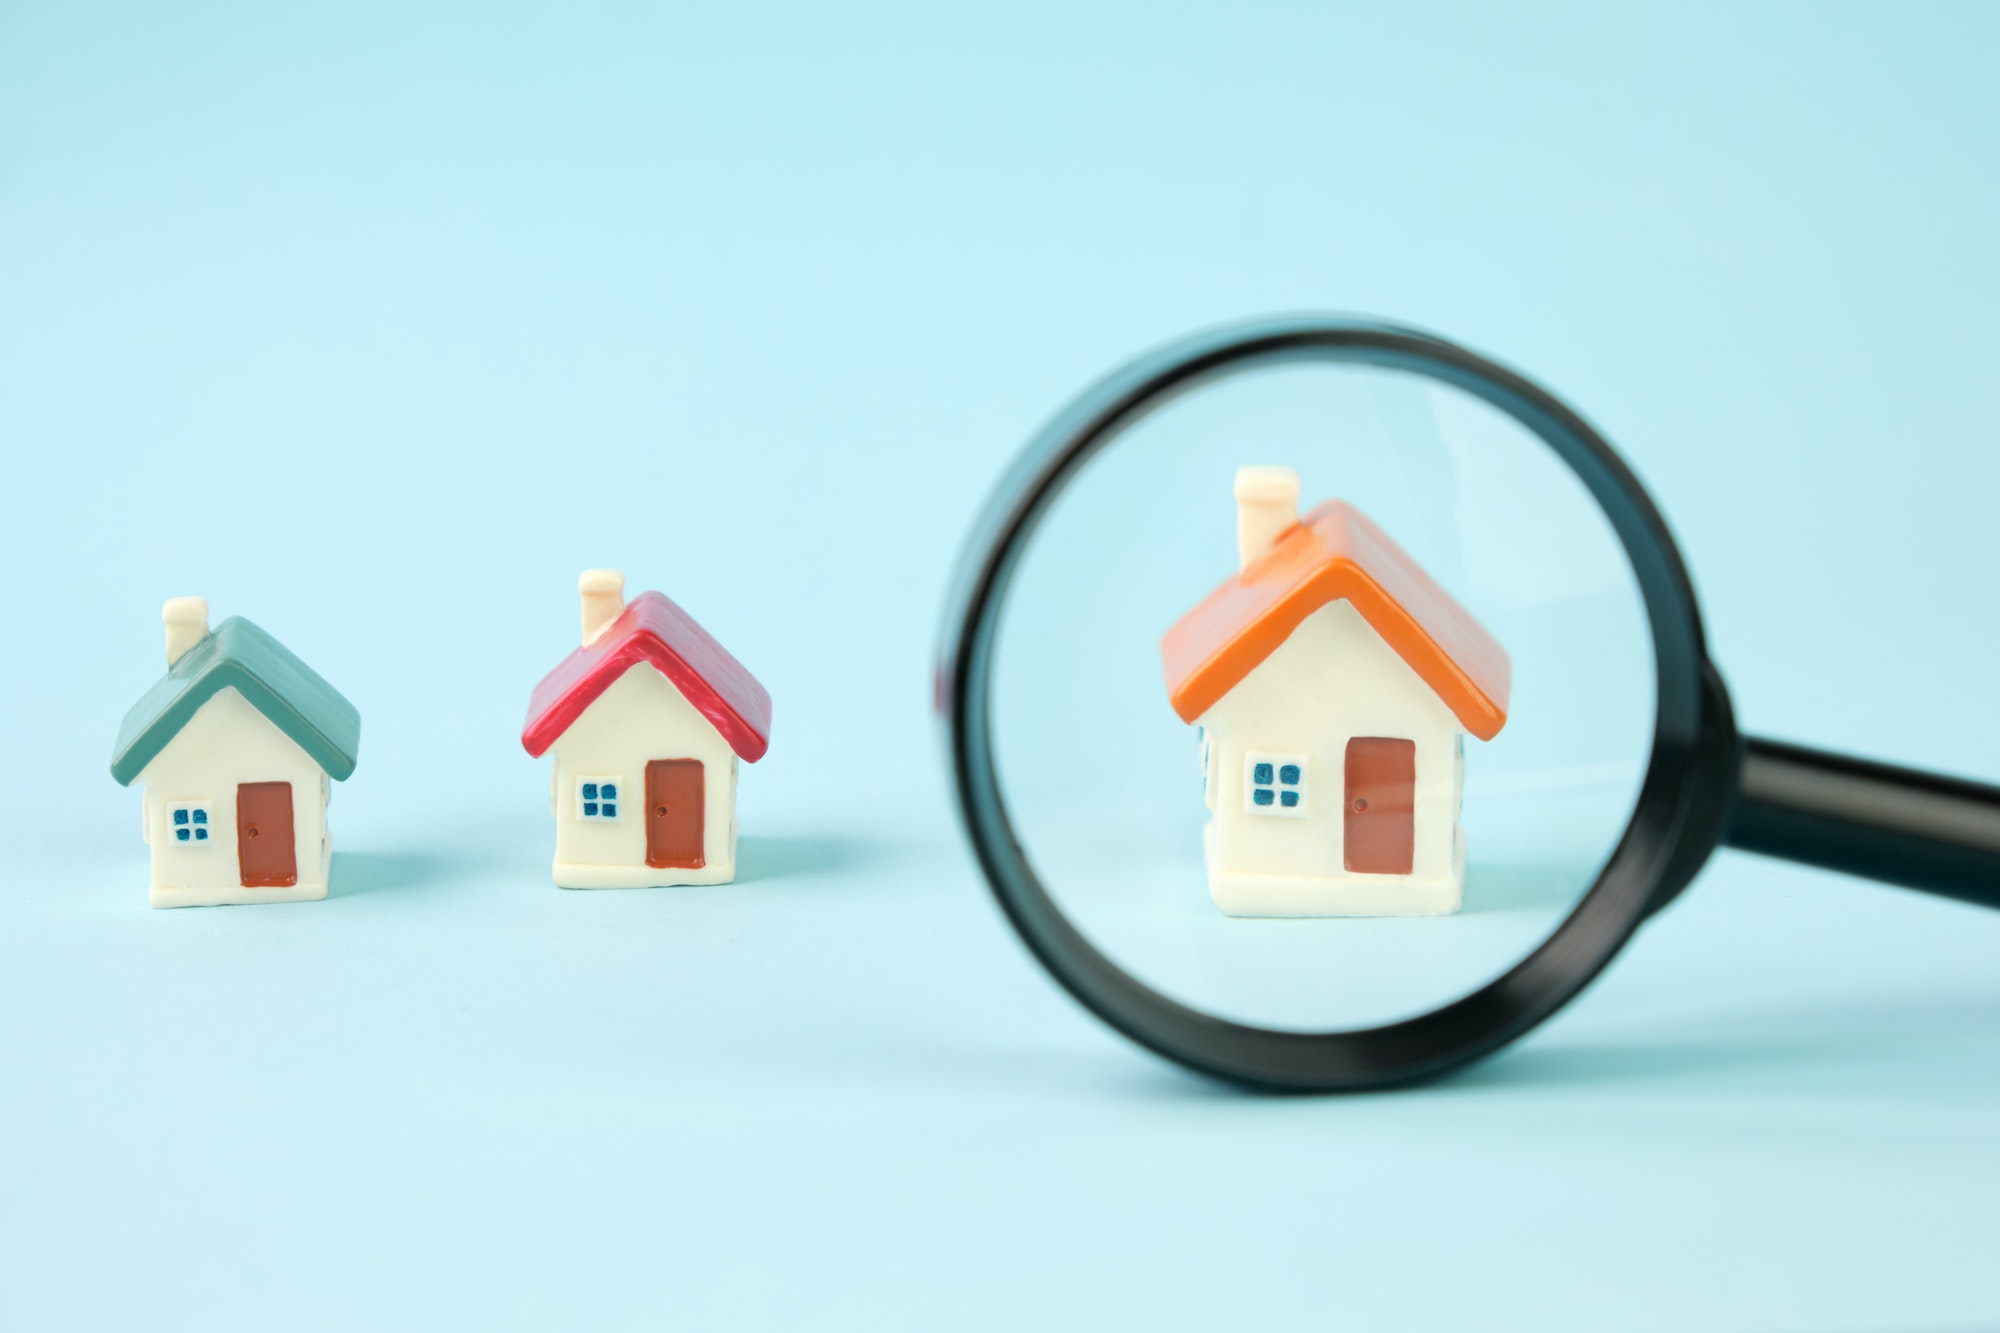 Small houses under a magnifying glass. Real estate search concept, purchase and sale of housing